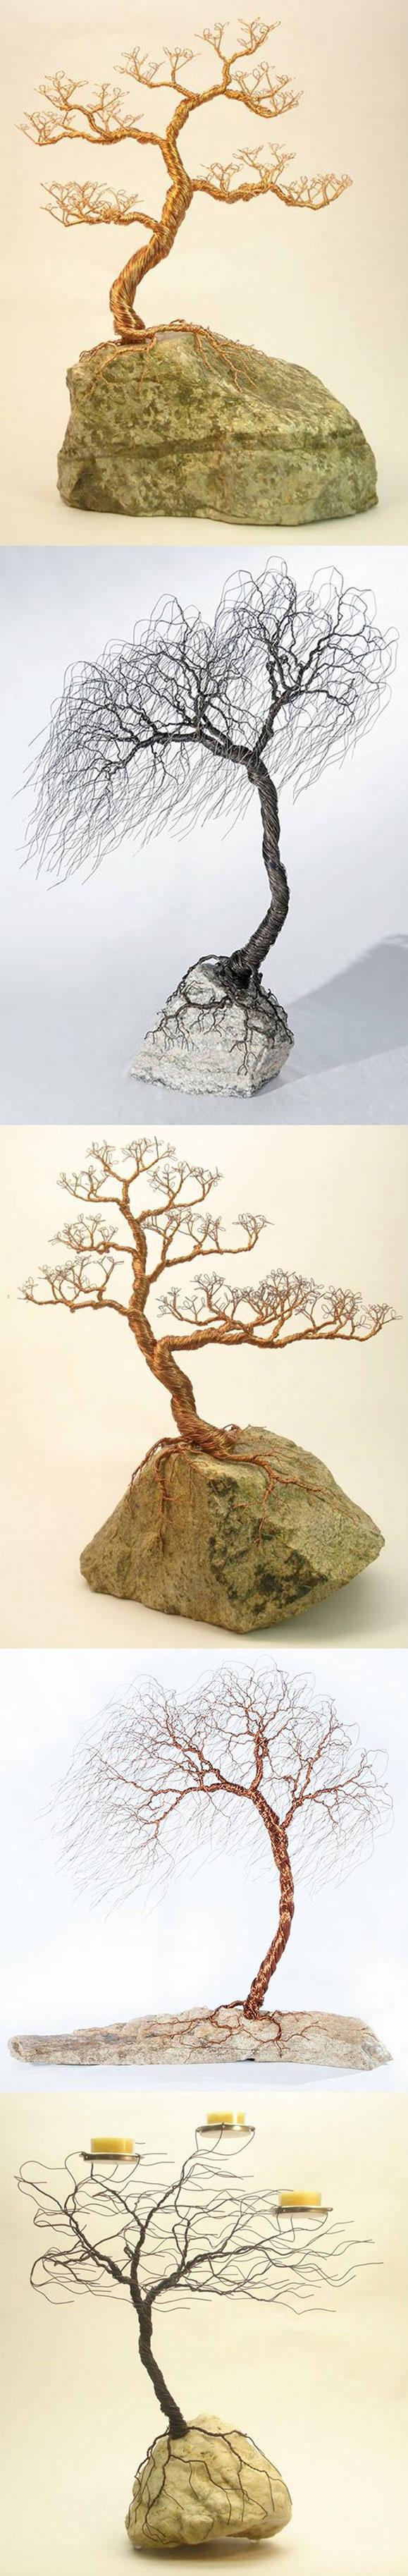 art, wire tree, attention to detail